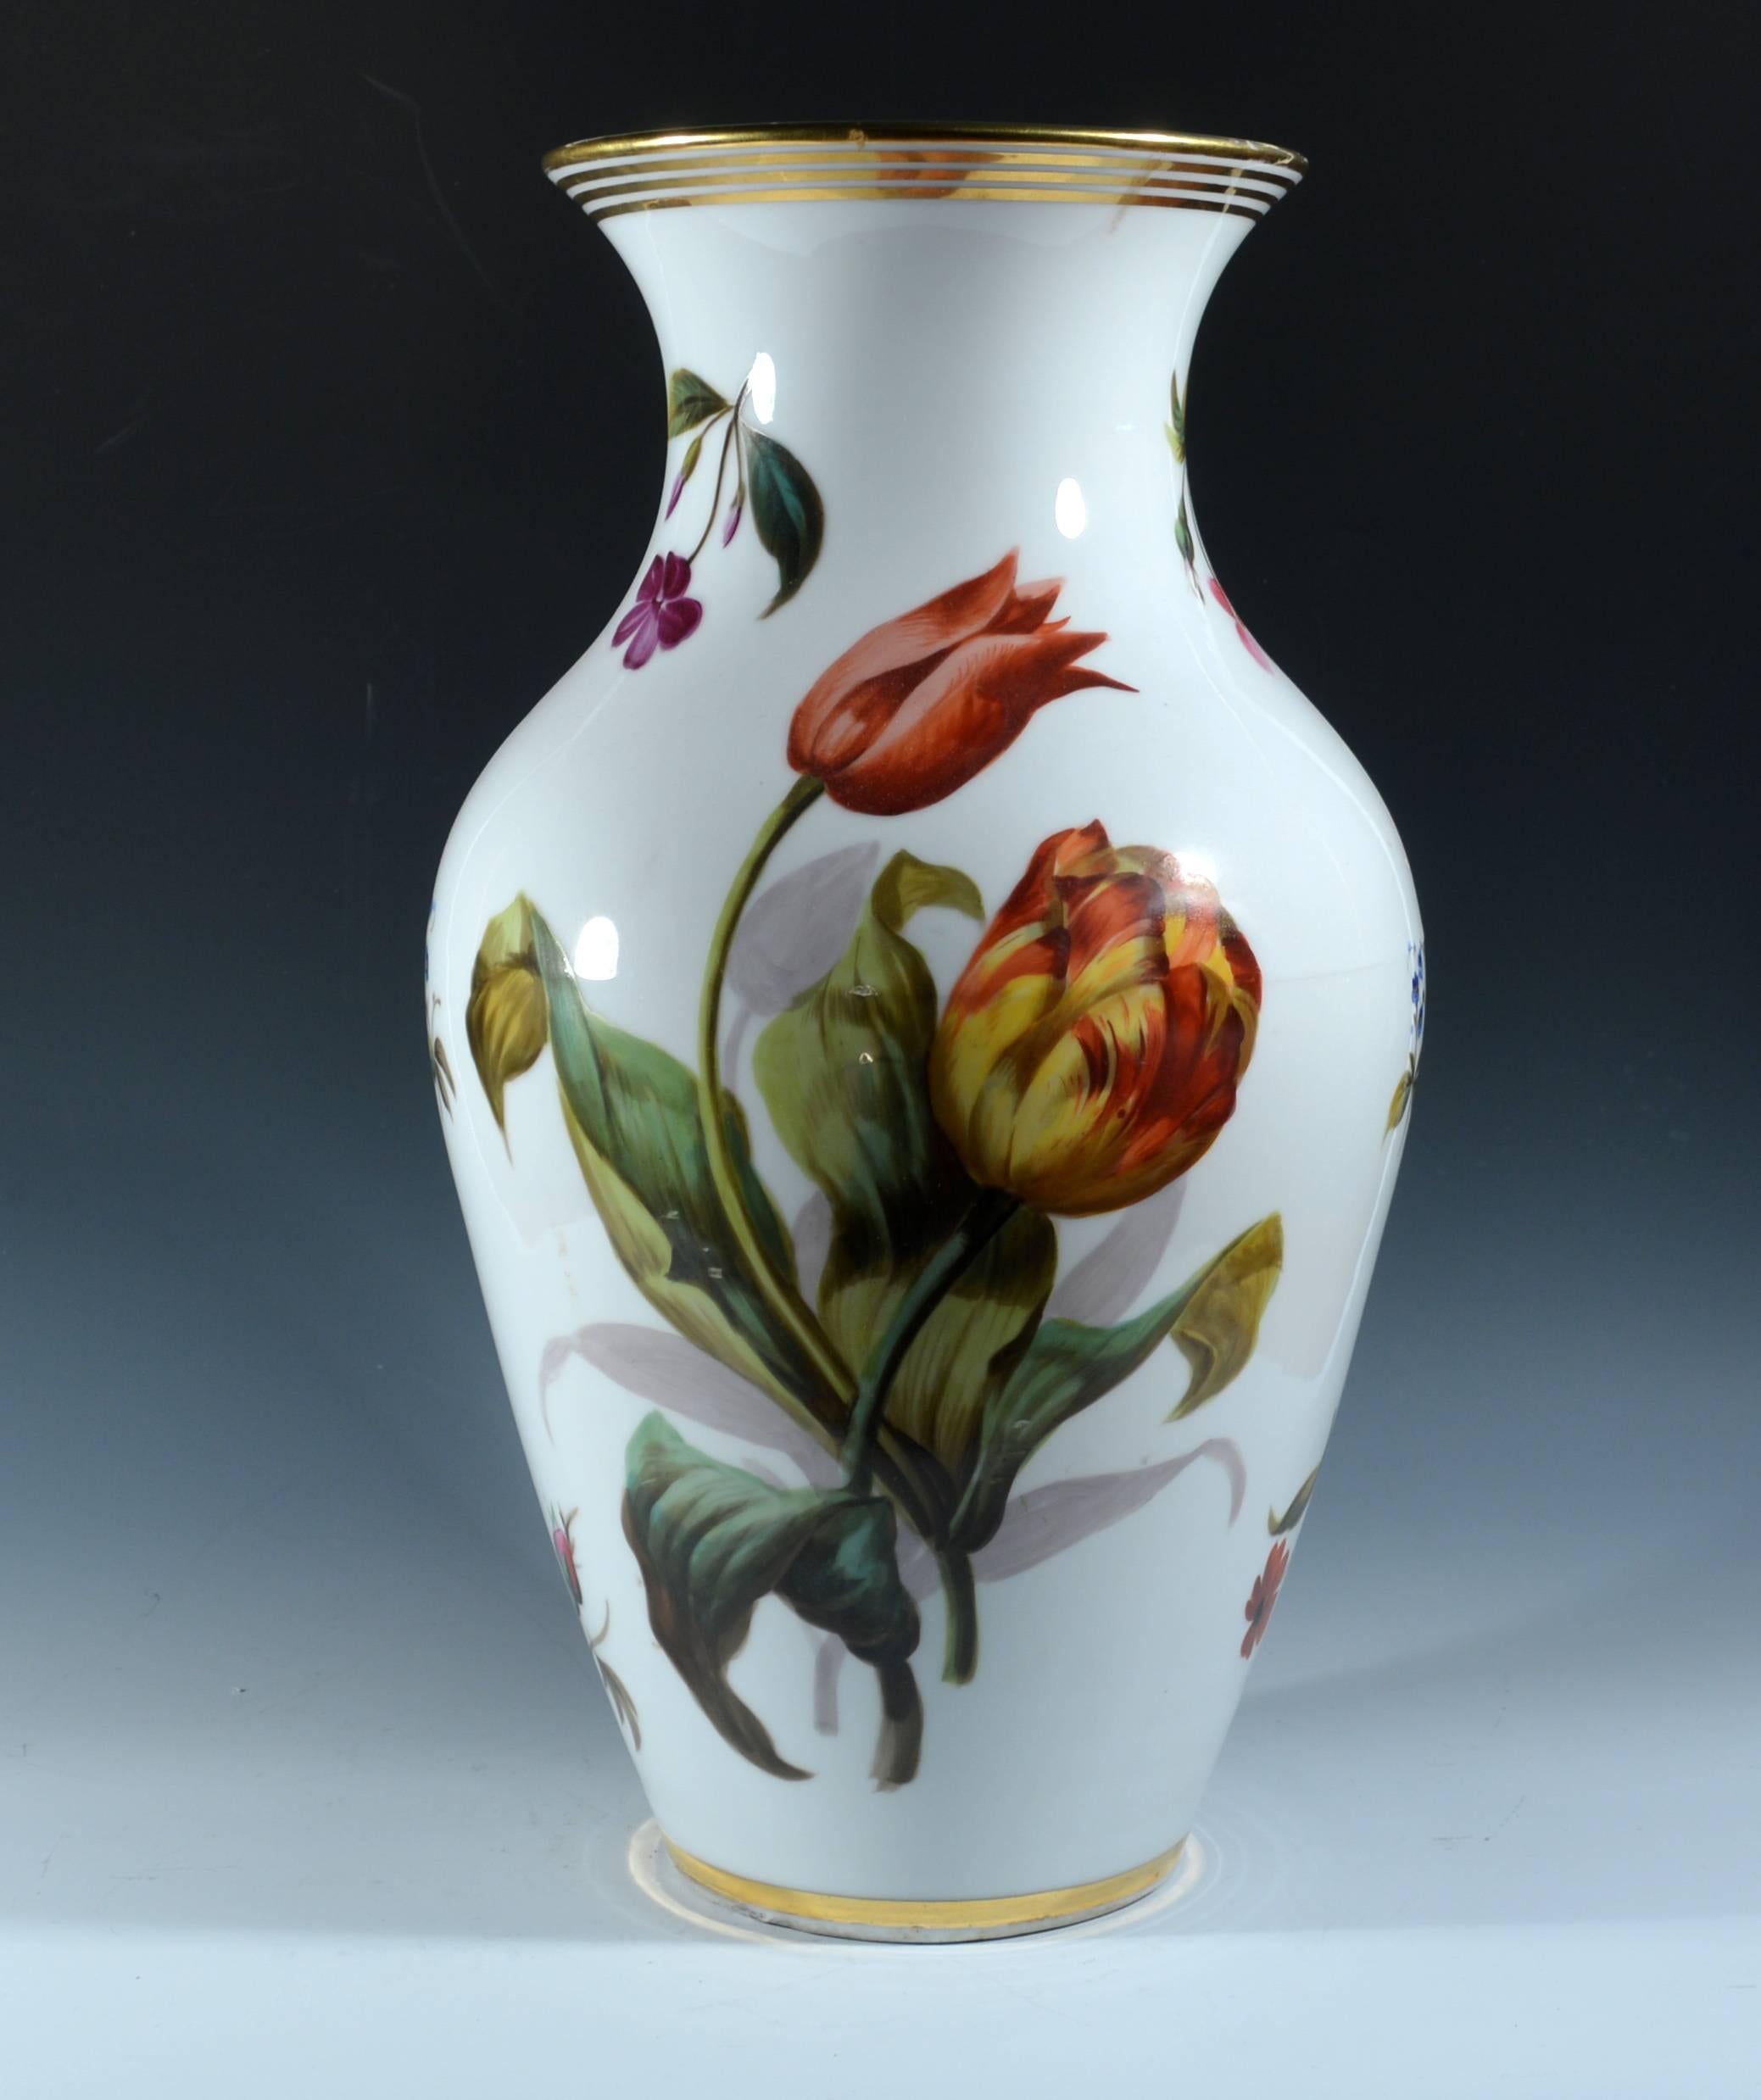 Paris Porcelain Botanical Vases, French, Mid-19th Century In Good Condition For Sale In Downingtown, PA